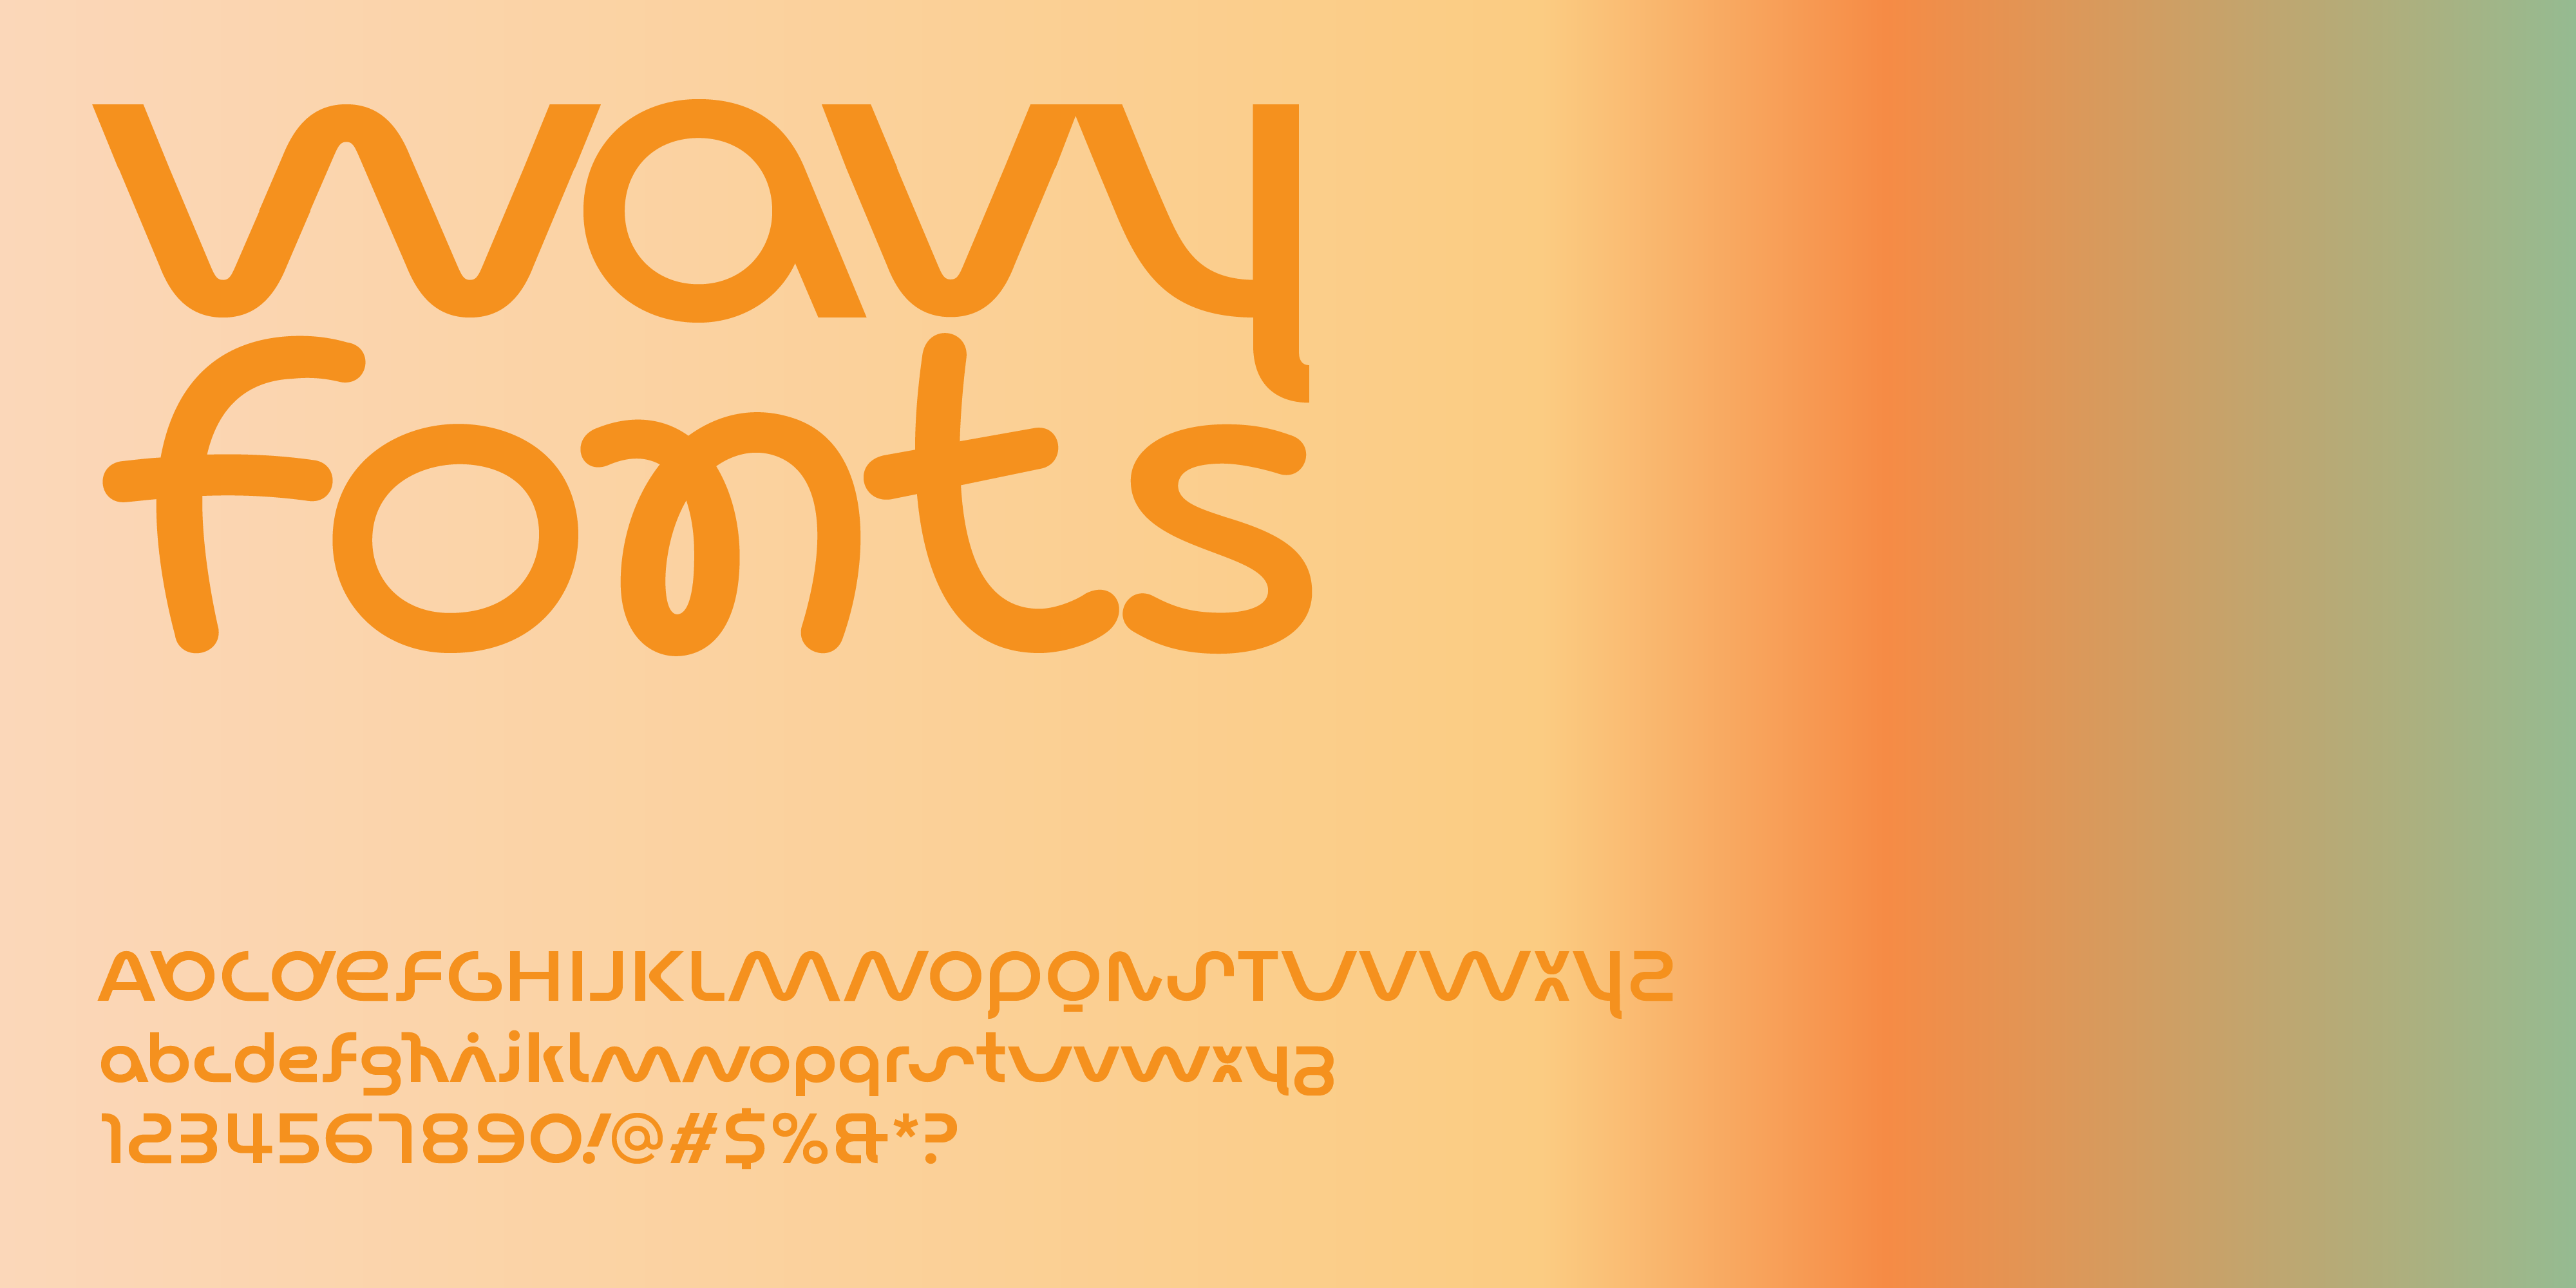 8 Wavy fonts to add playfulness to your designs